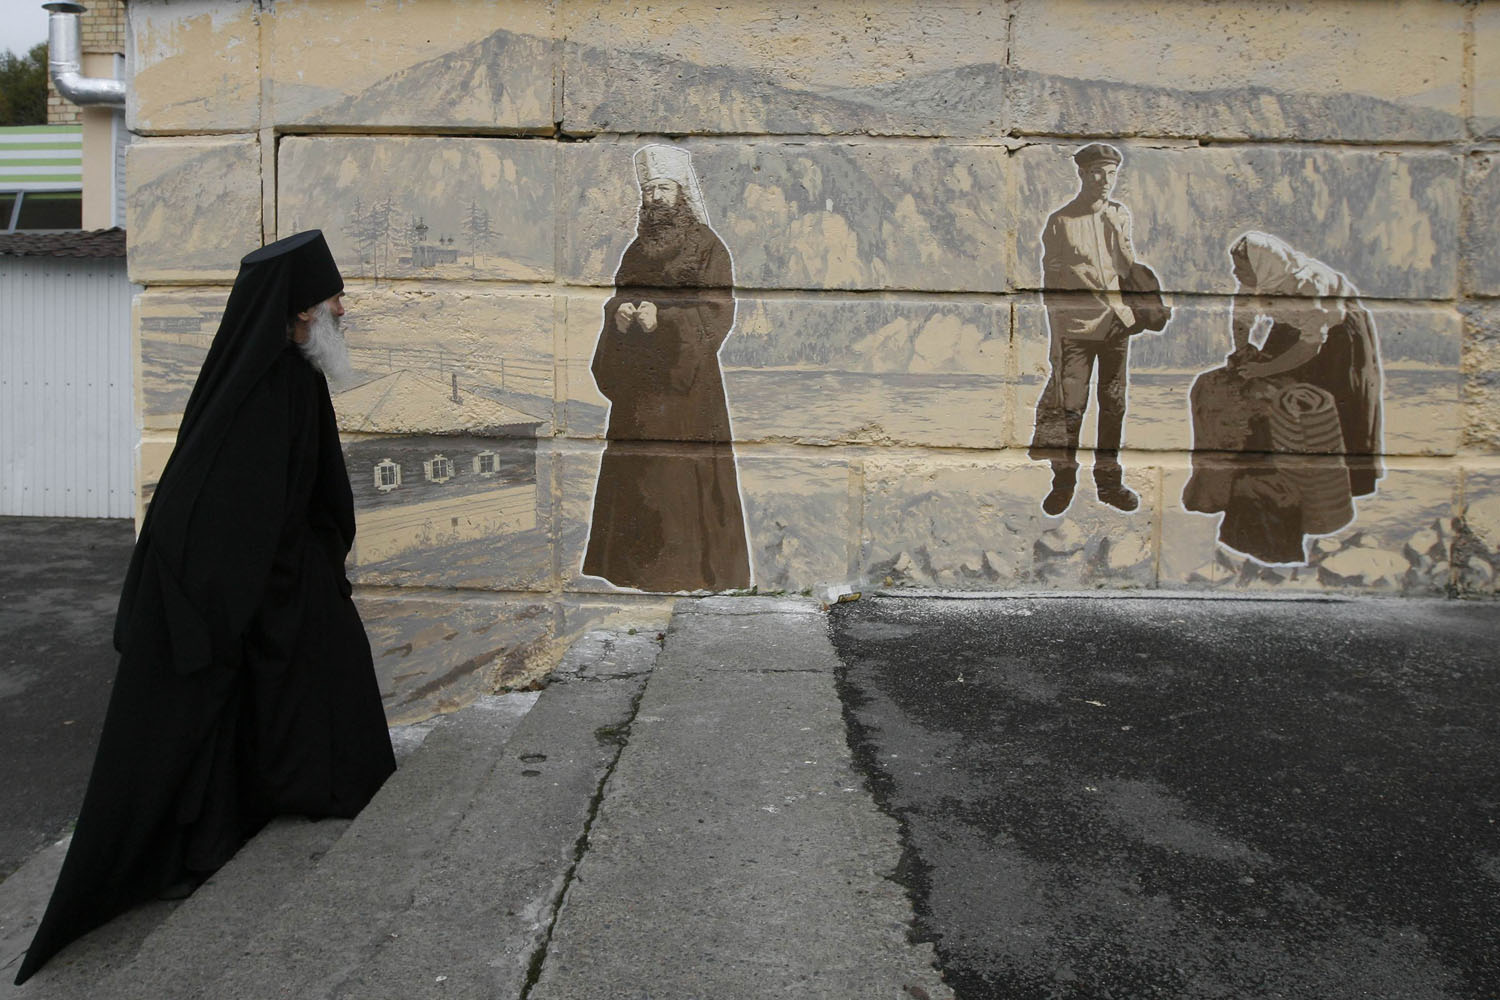 Sept. 30, 2013. Orthodox monk Father Ioakim, 74, looks at a street graffiti, which displays Siberian characters of the 19th century including an Russian Orthodox monk, in Divnogorsk town outside Russia's Siberian city of Krasnoyarsk.